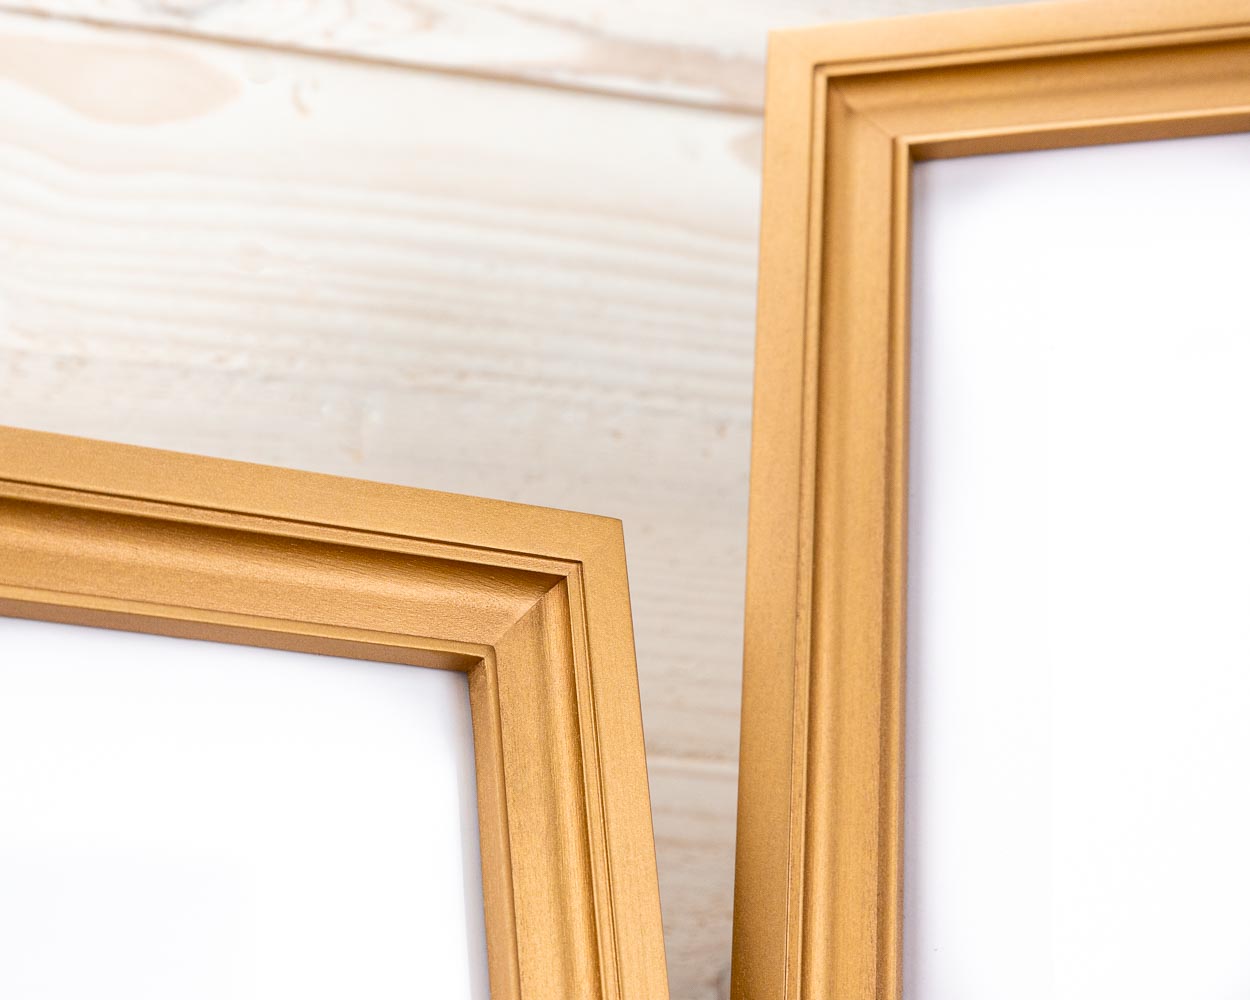 Gold Vintage Style Photo Frame from Solid Birch Hardwood